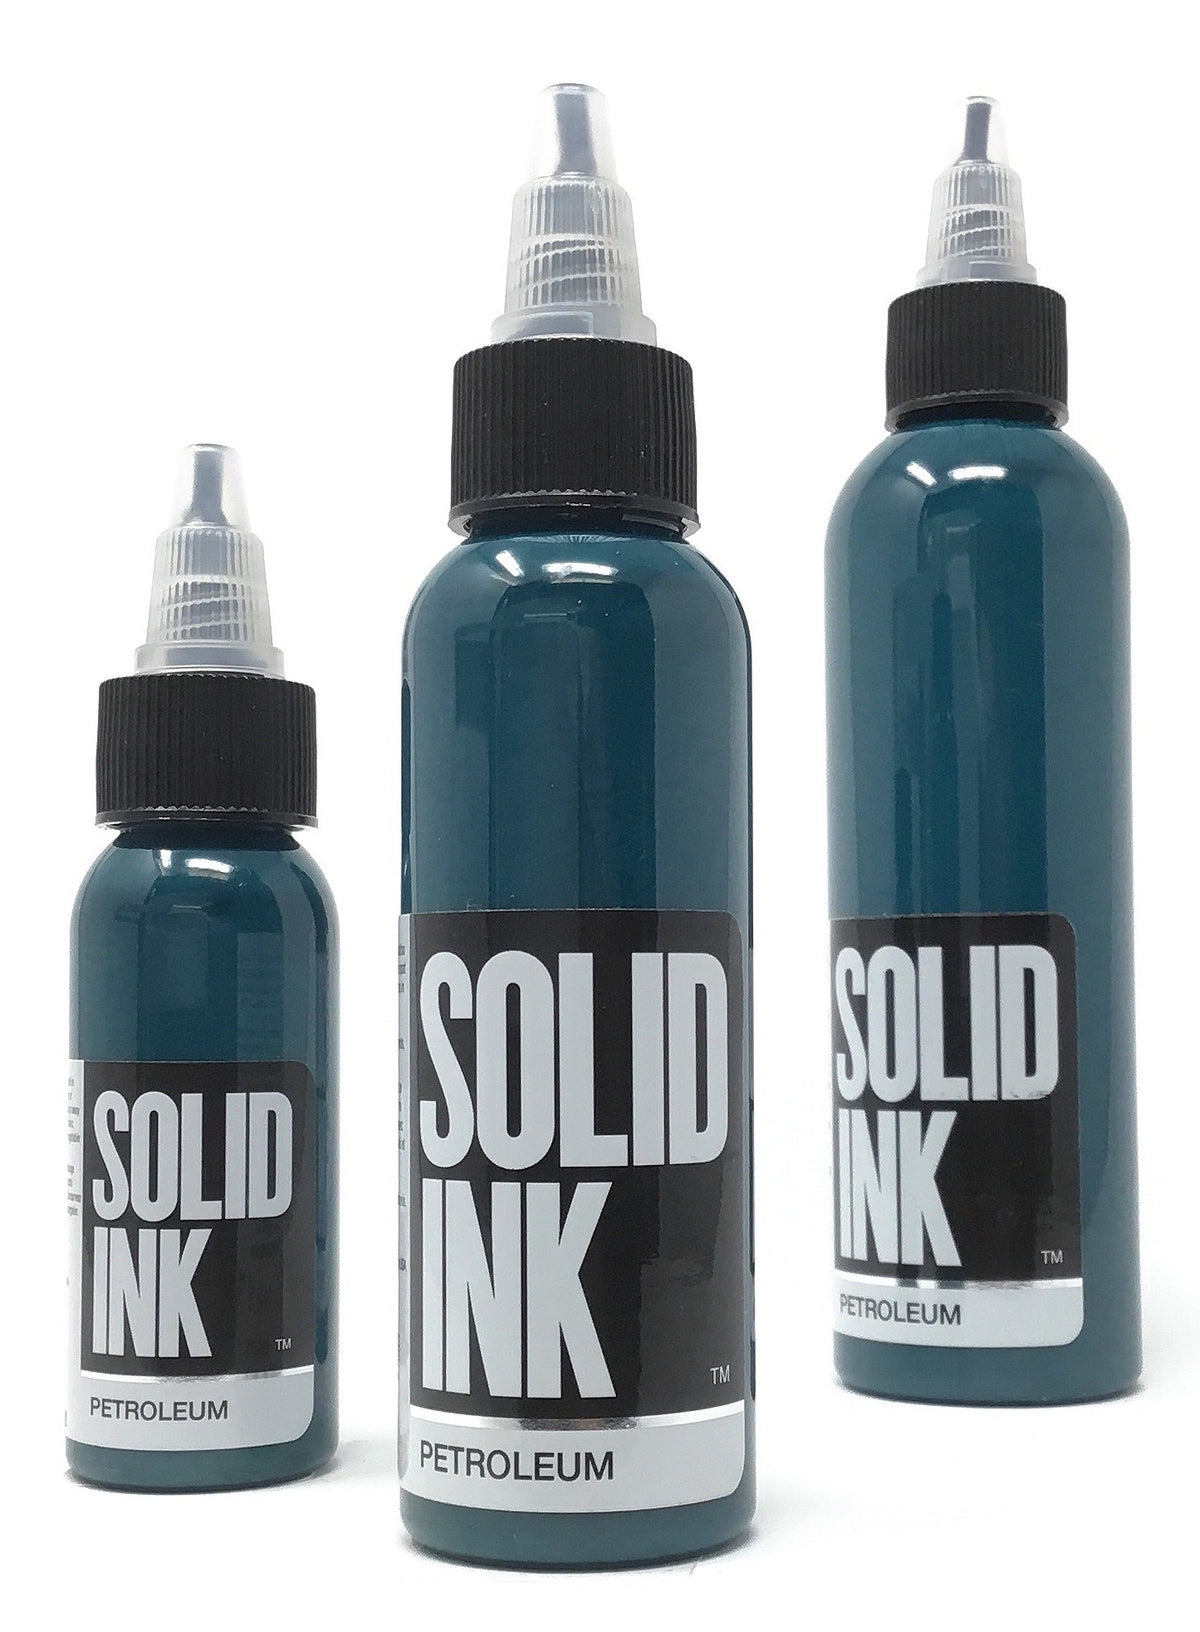 Solid Ink Petroleum Tattoo Ink